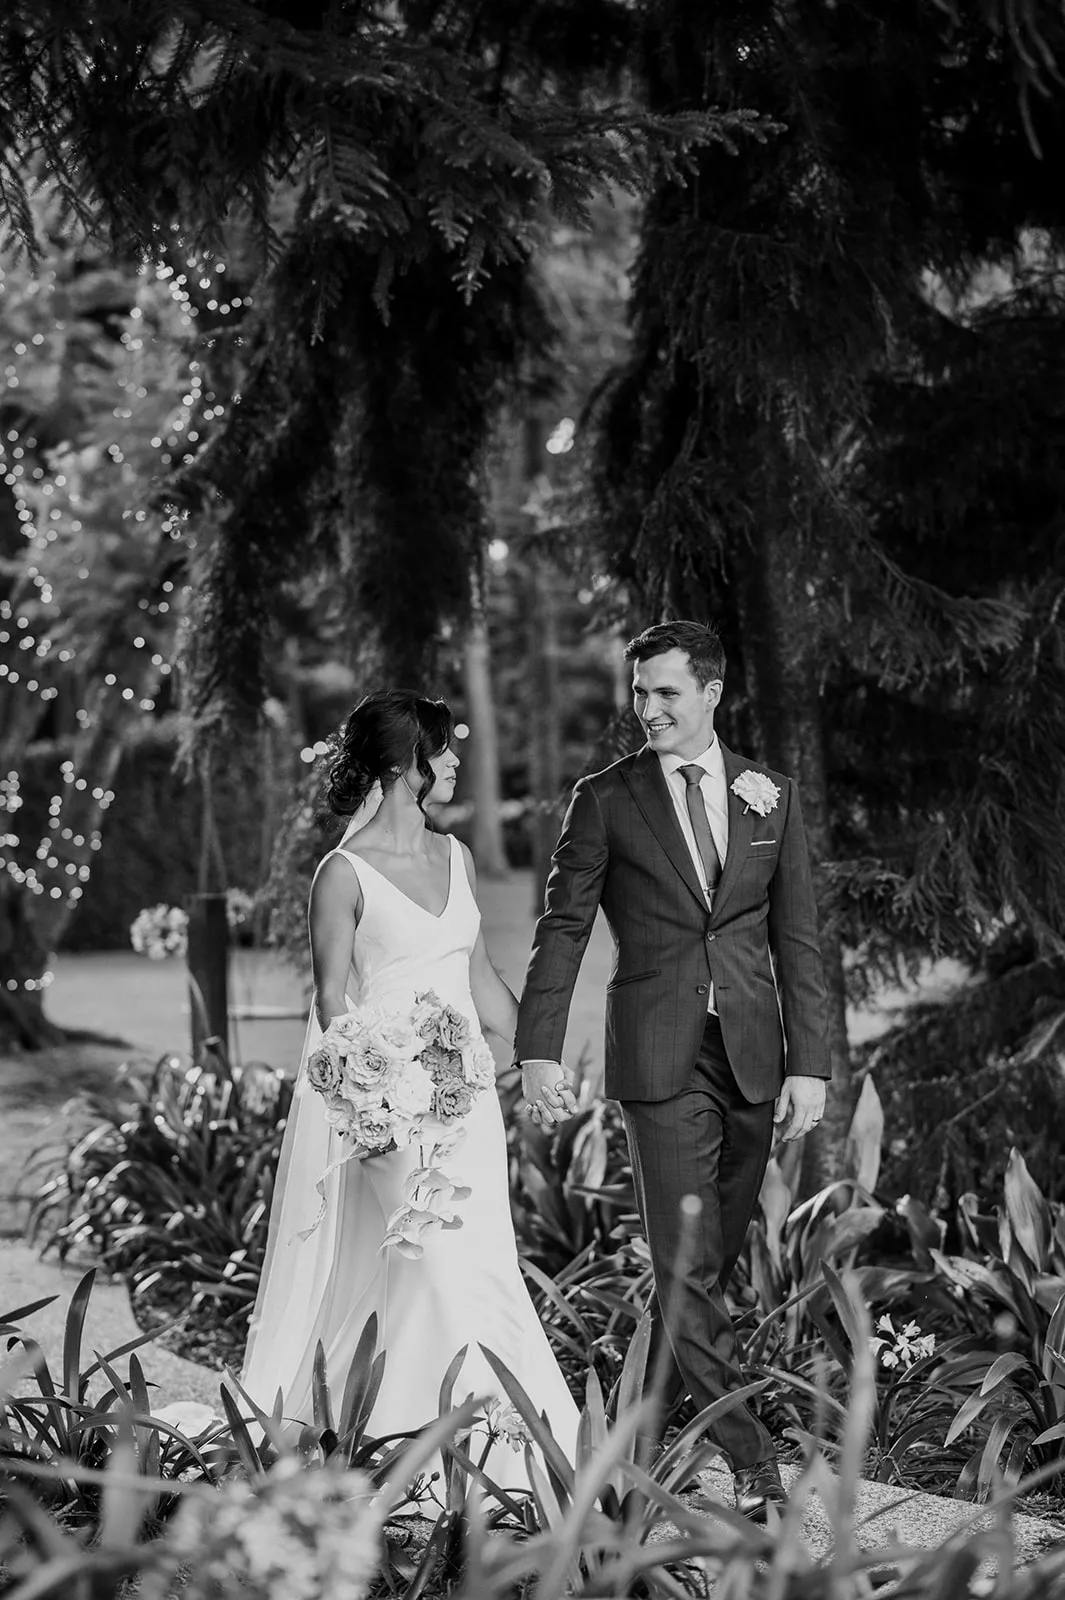 Black and white photo of a bride and groom walking hand in hand in an outdoor setting. The bride is wearing a white dress and holding a bouquet, while the groom is wearing a dark suit with a boutonnière. They are surrounded by trees and foliage, with lights in the background.